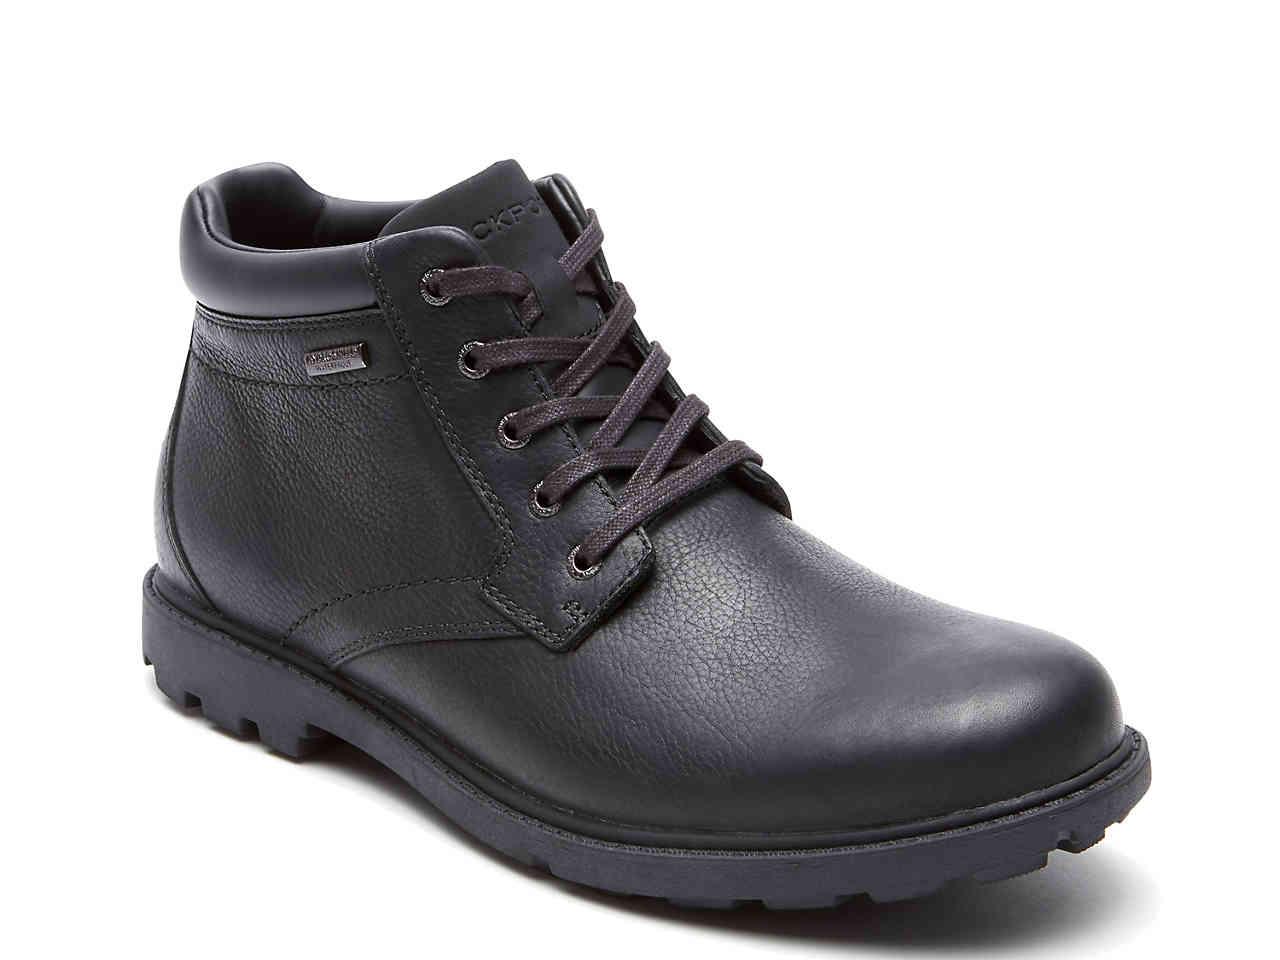 Rockport Leather Storm Surge Boot in Black for Men - Lyst